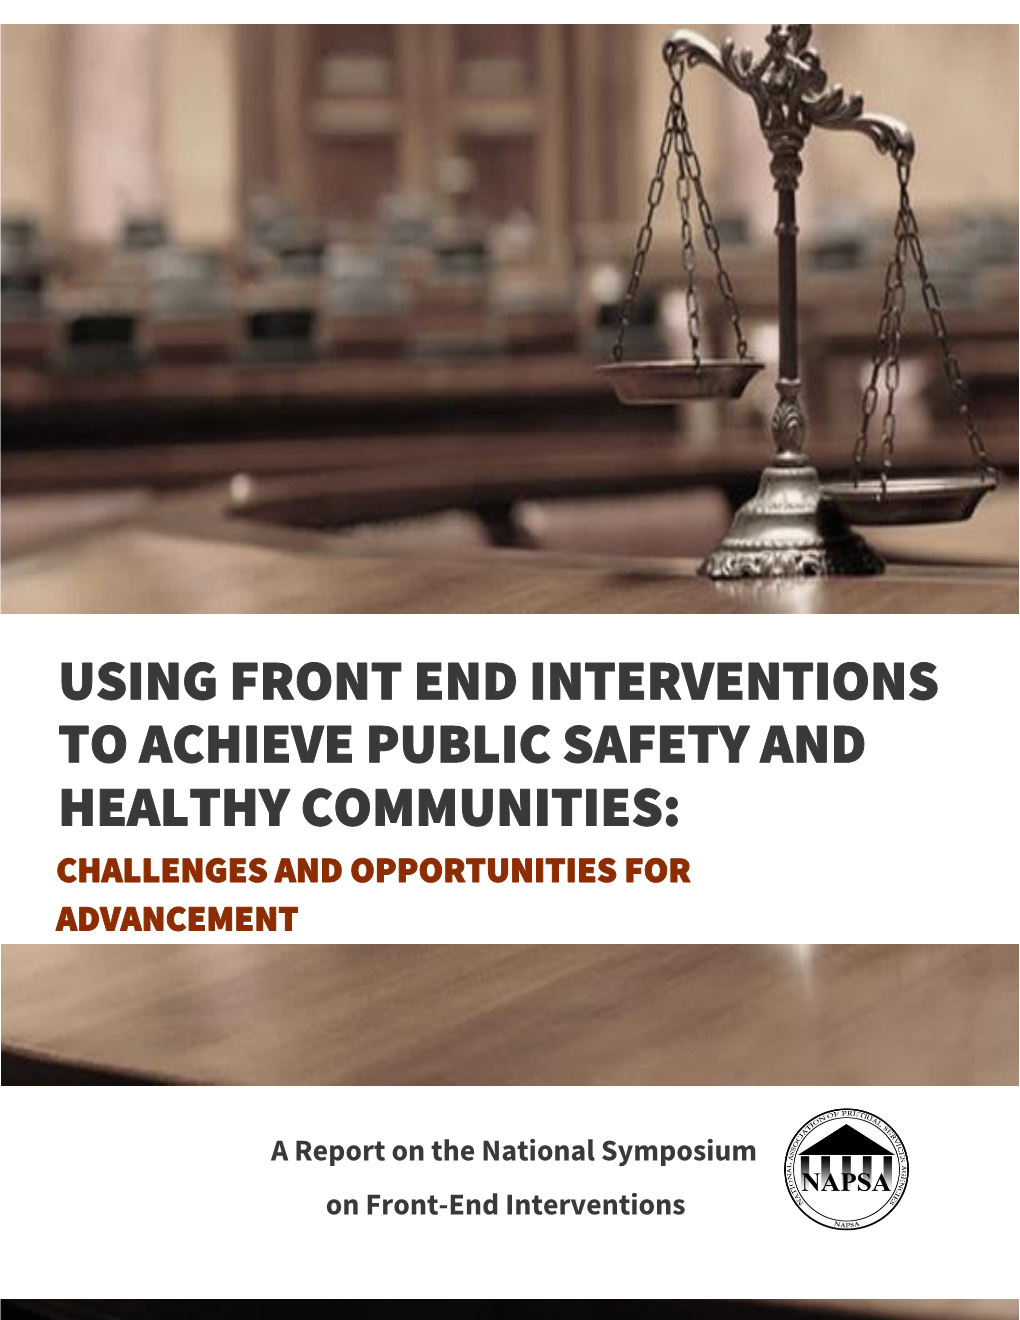 Using Front-End Interventions to Achieve Public Safety and Healthy Communities: Challenges and Opportunities for Advancement